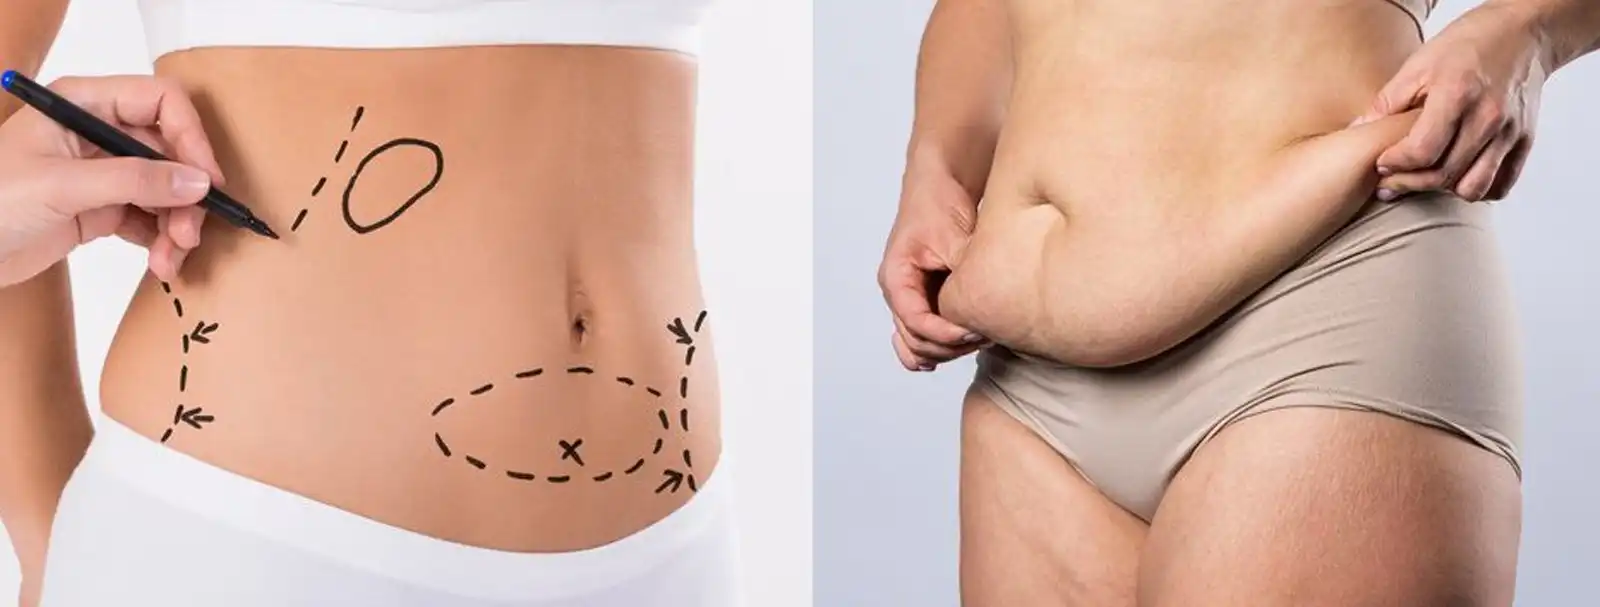 Liposuction vs Tummy Tuck: Differences and Procedures